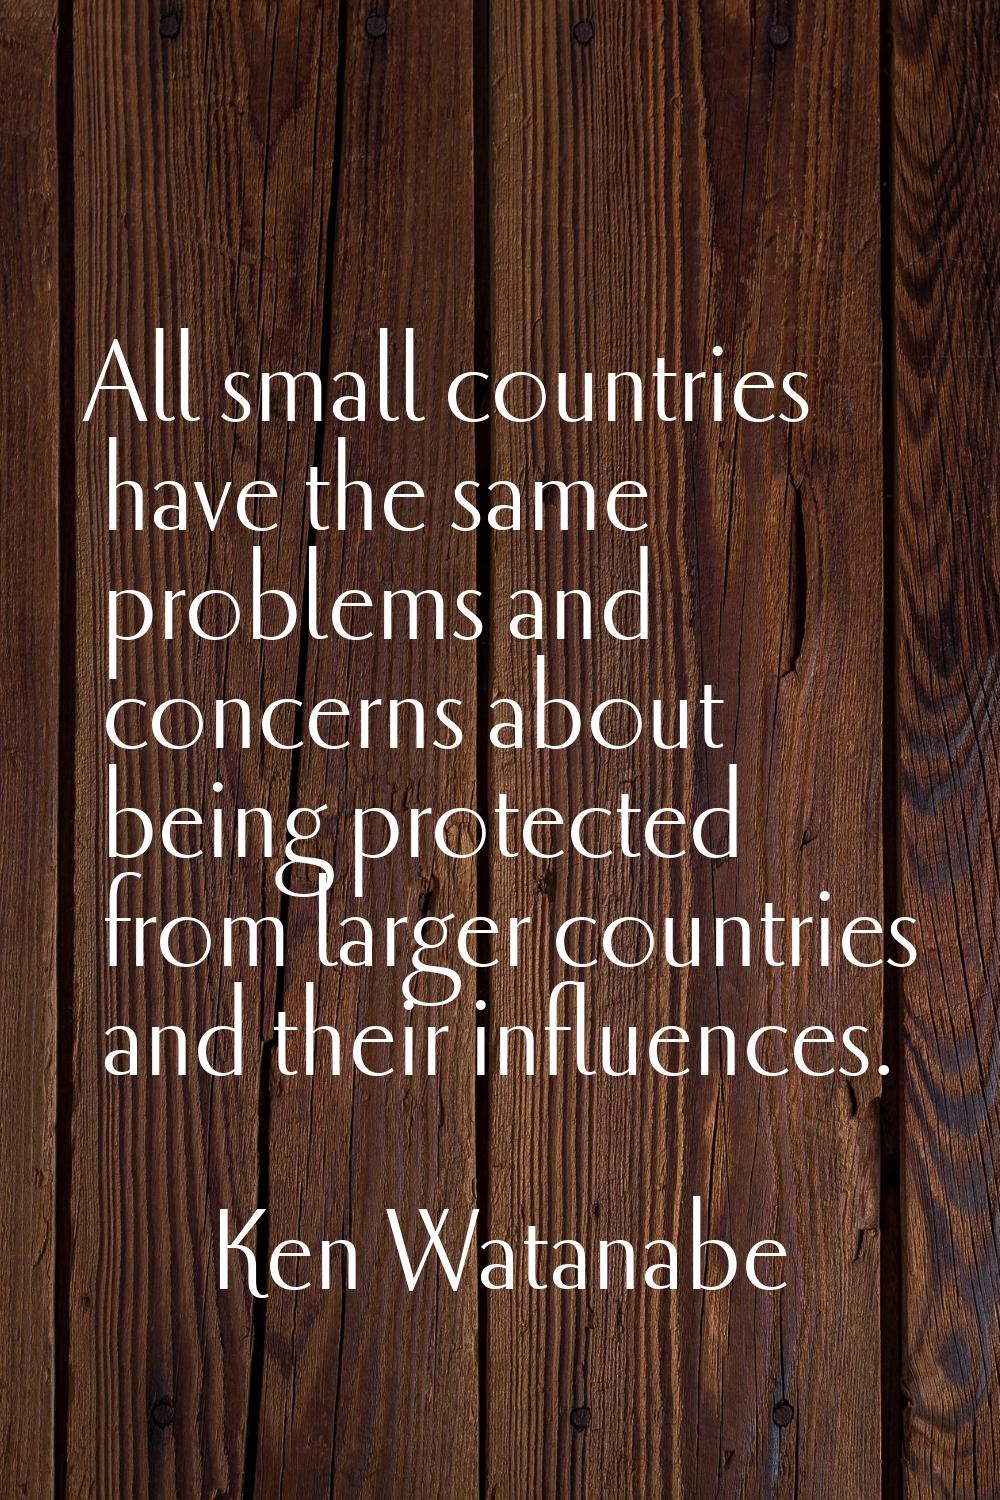 All small countries have the same problems and concerns about being protected from larger countries